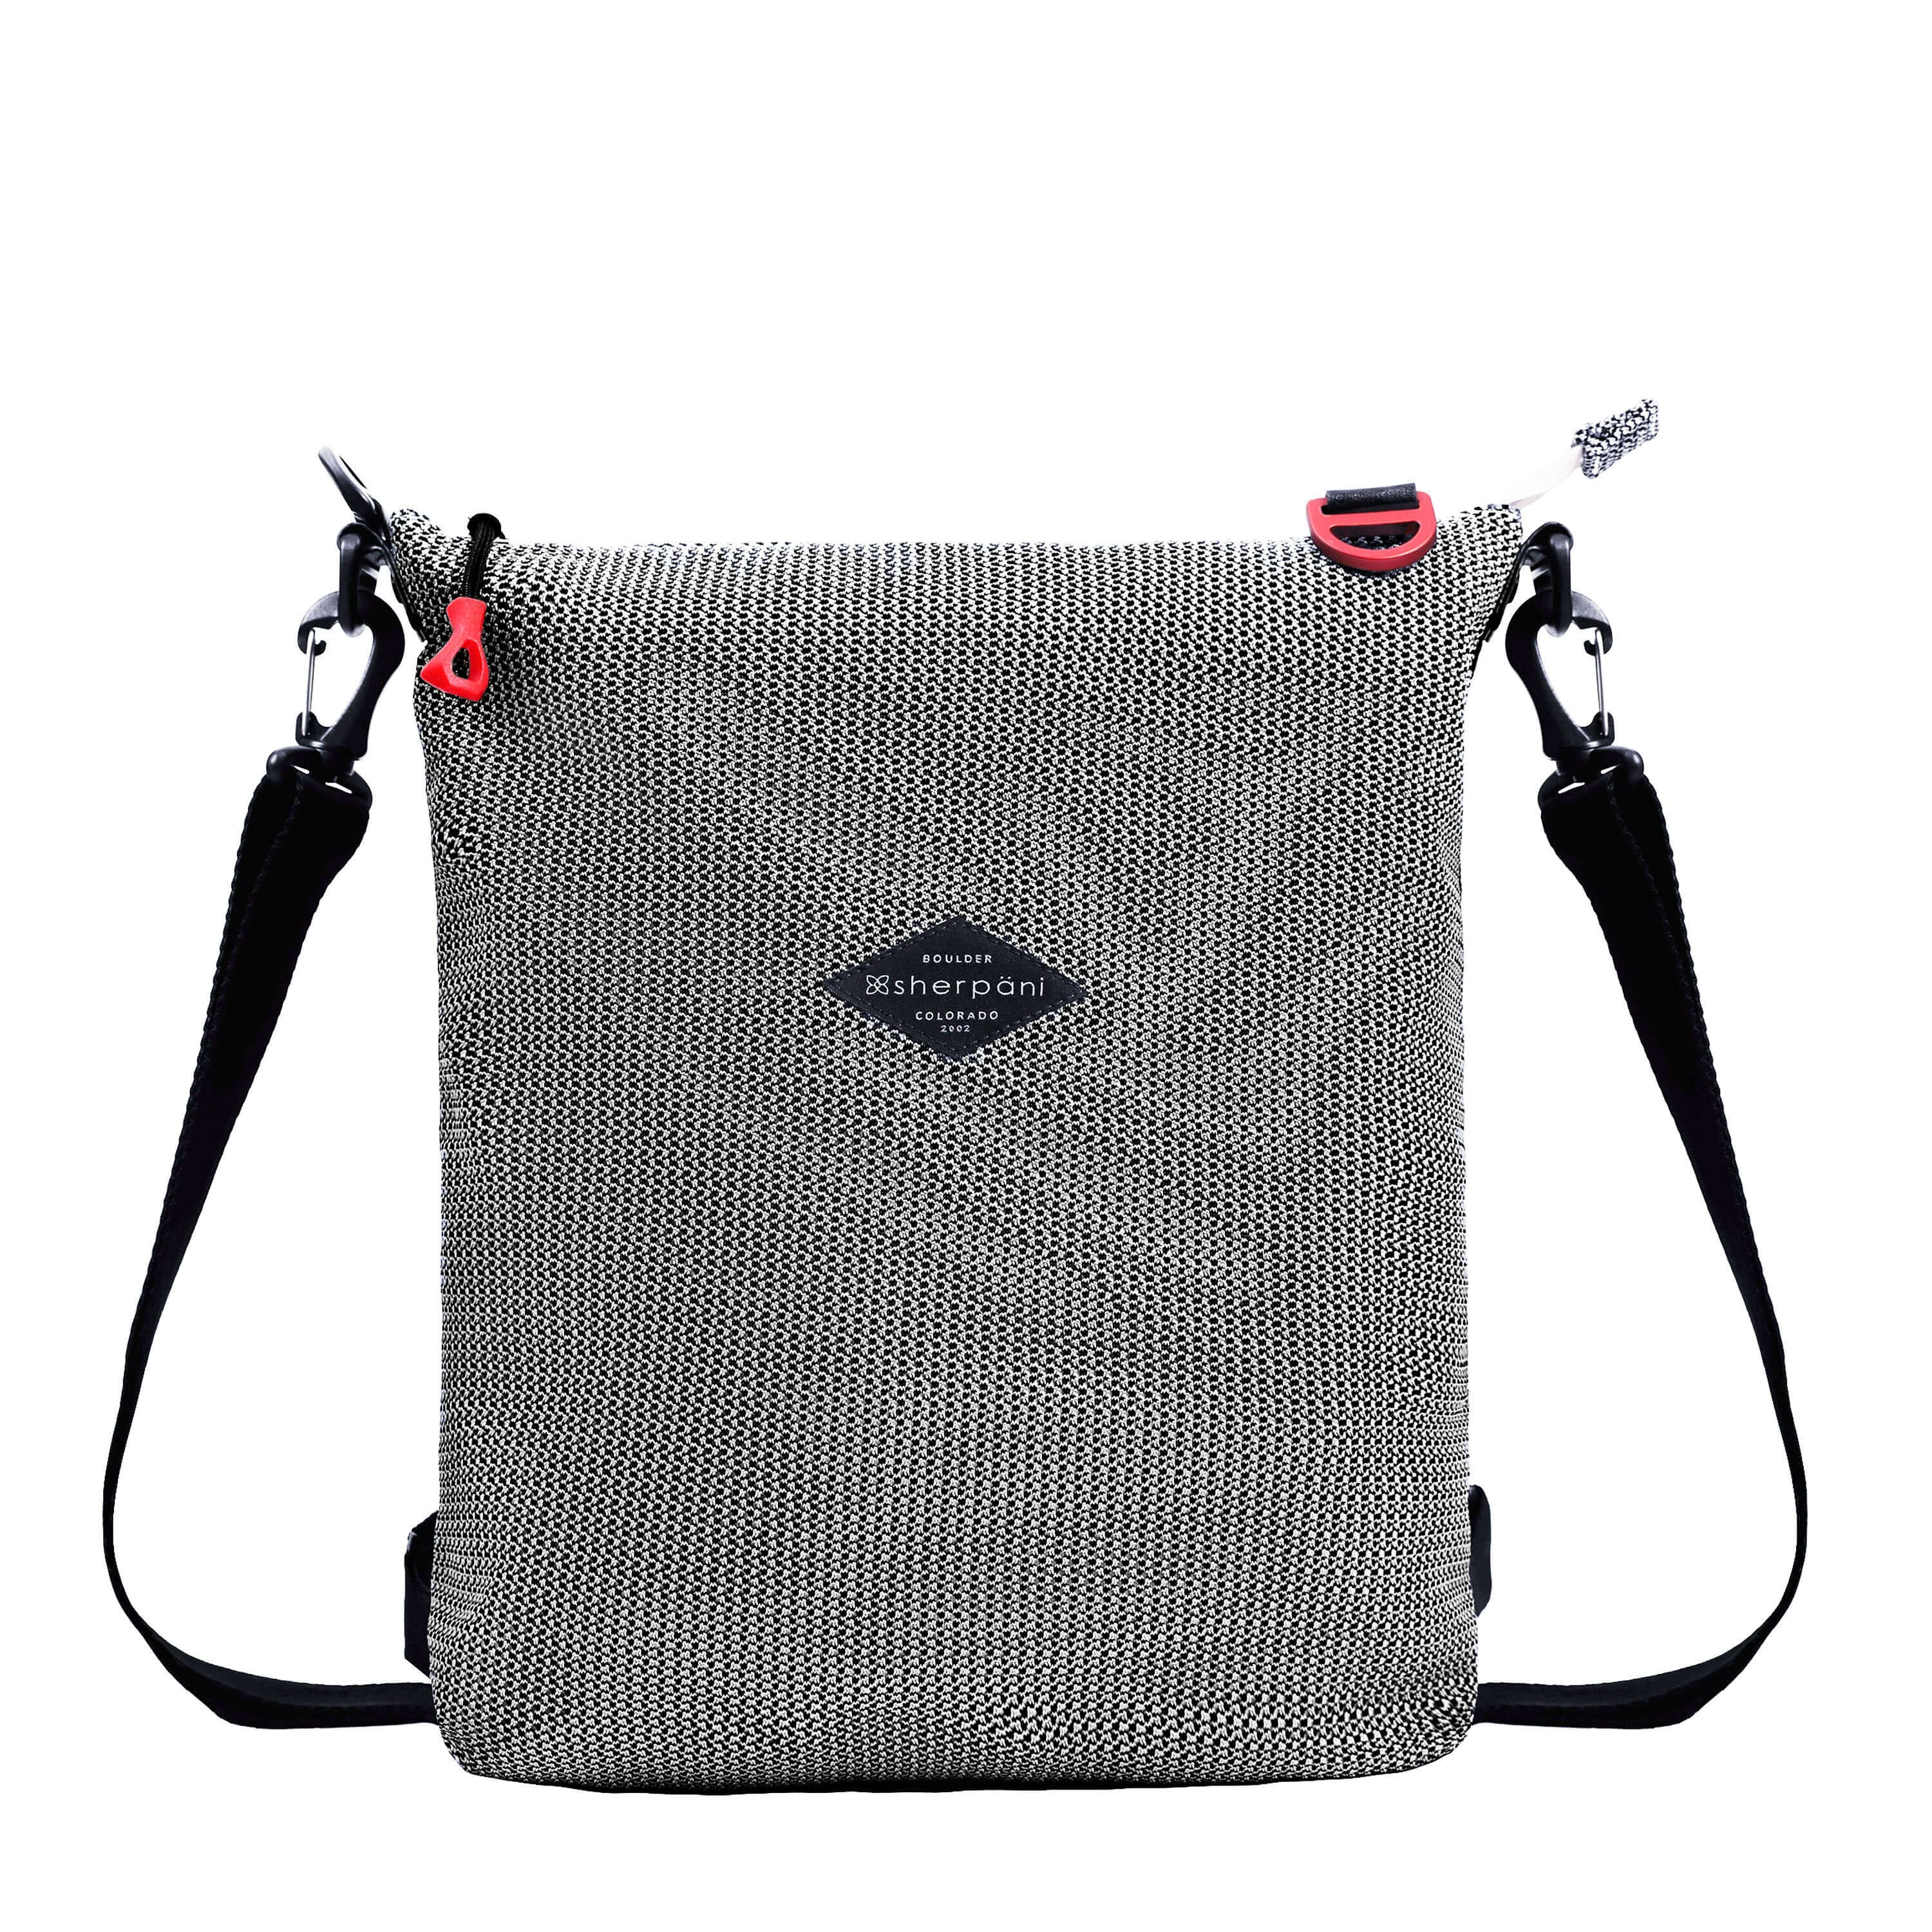 Flat front view of Sherpani convertible mesh bag, the Delanie. It has a black and white mesh pattern and features pops of red on the accent buckle and easy-pull zipper. The bag has adjustable backpack straps and an adjustable/detachable crossbody strap.